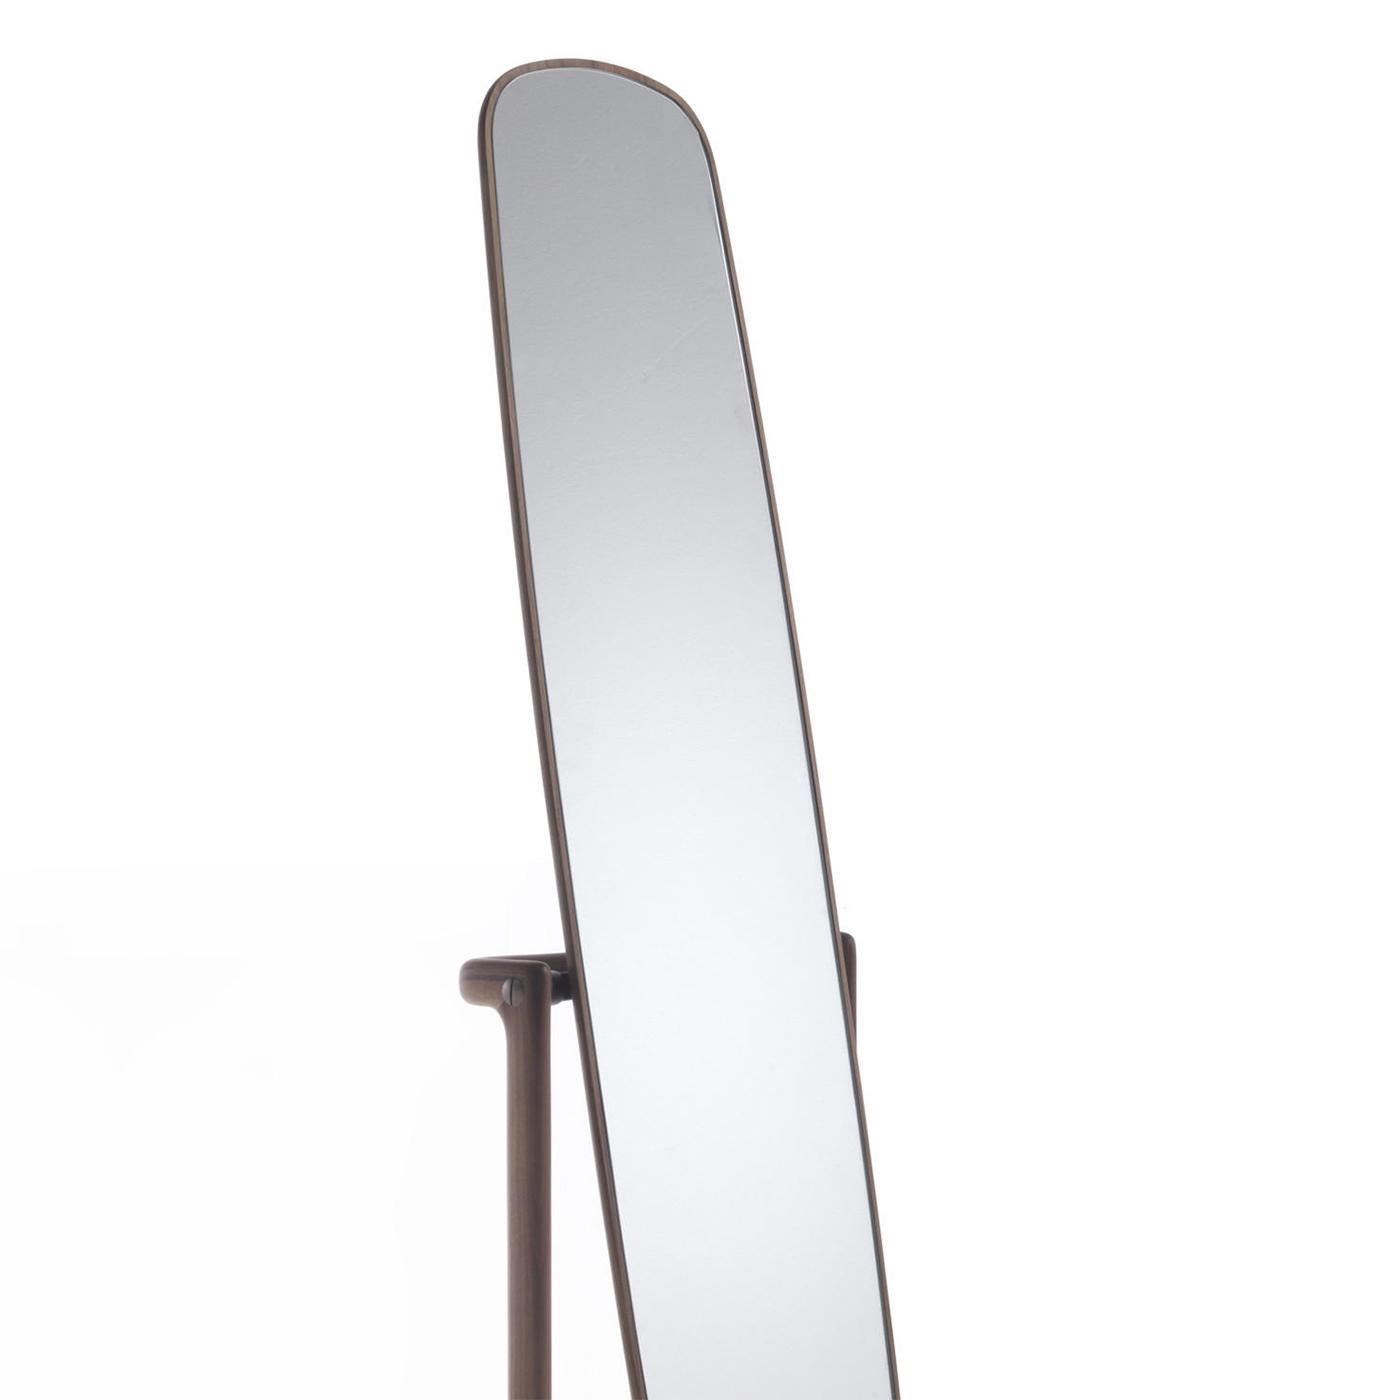 Mirror portrait walnut made with solid handcrafted
walnut wood, with removable mirror glass with solid
handcrafted walnut wood frame. Net weight: 26kg.